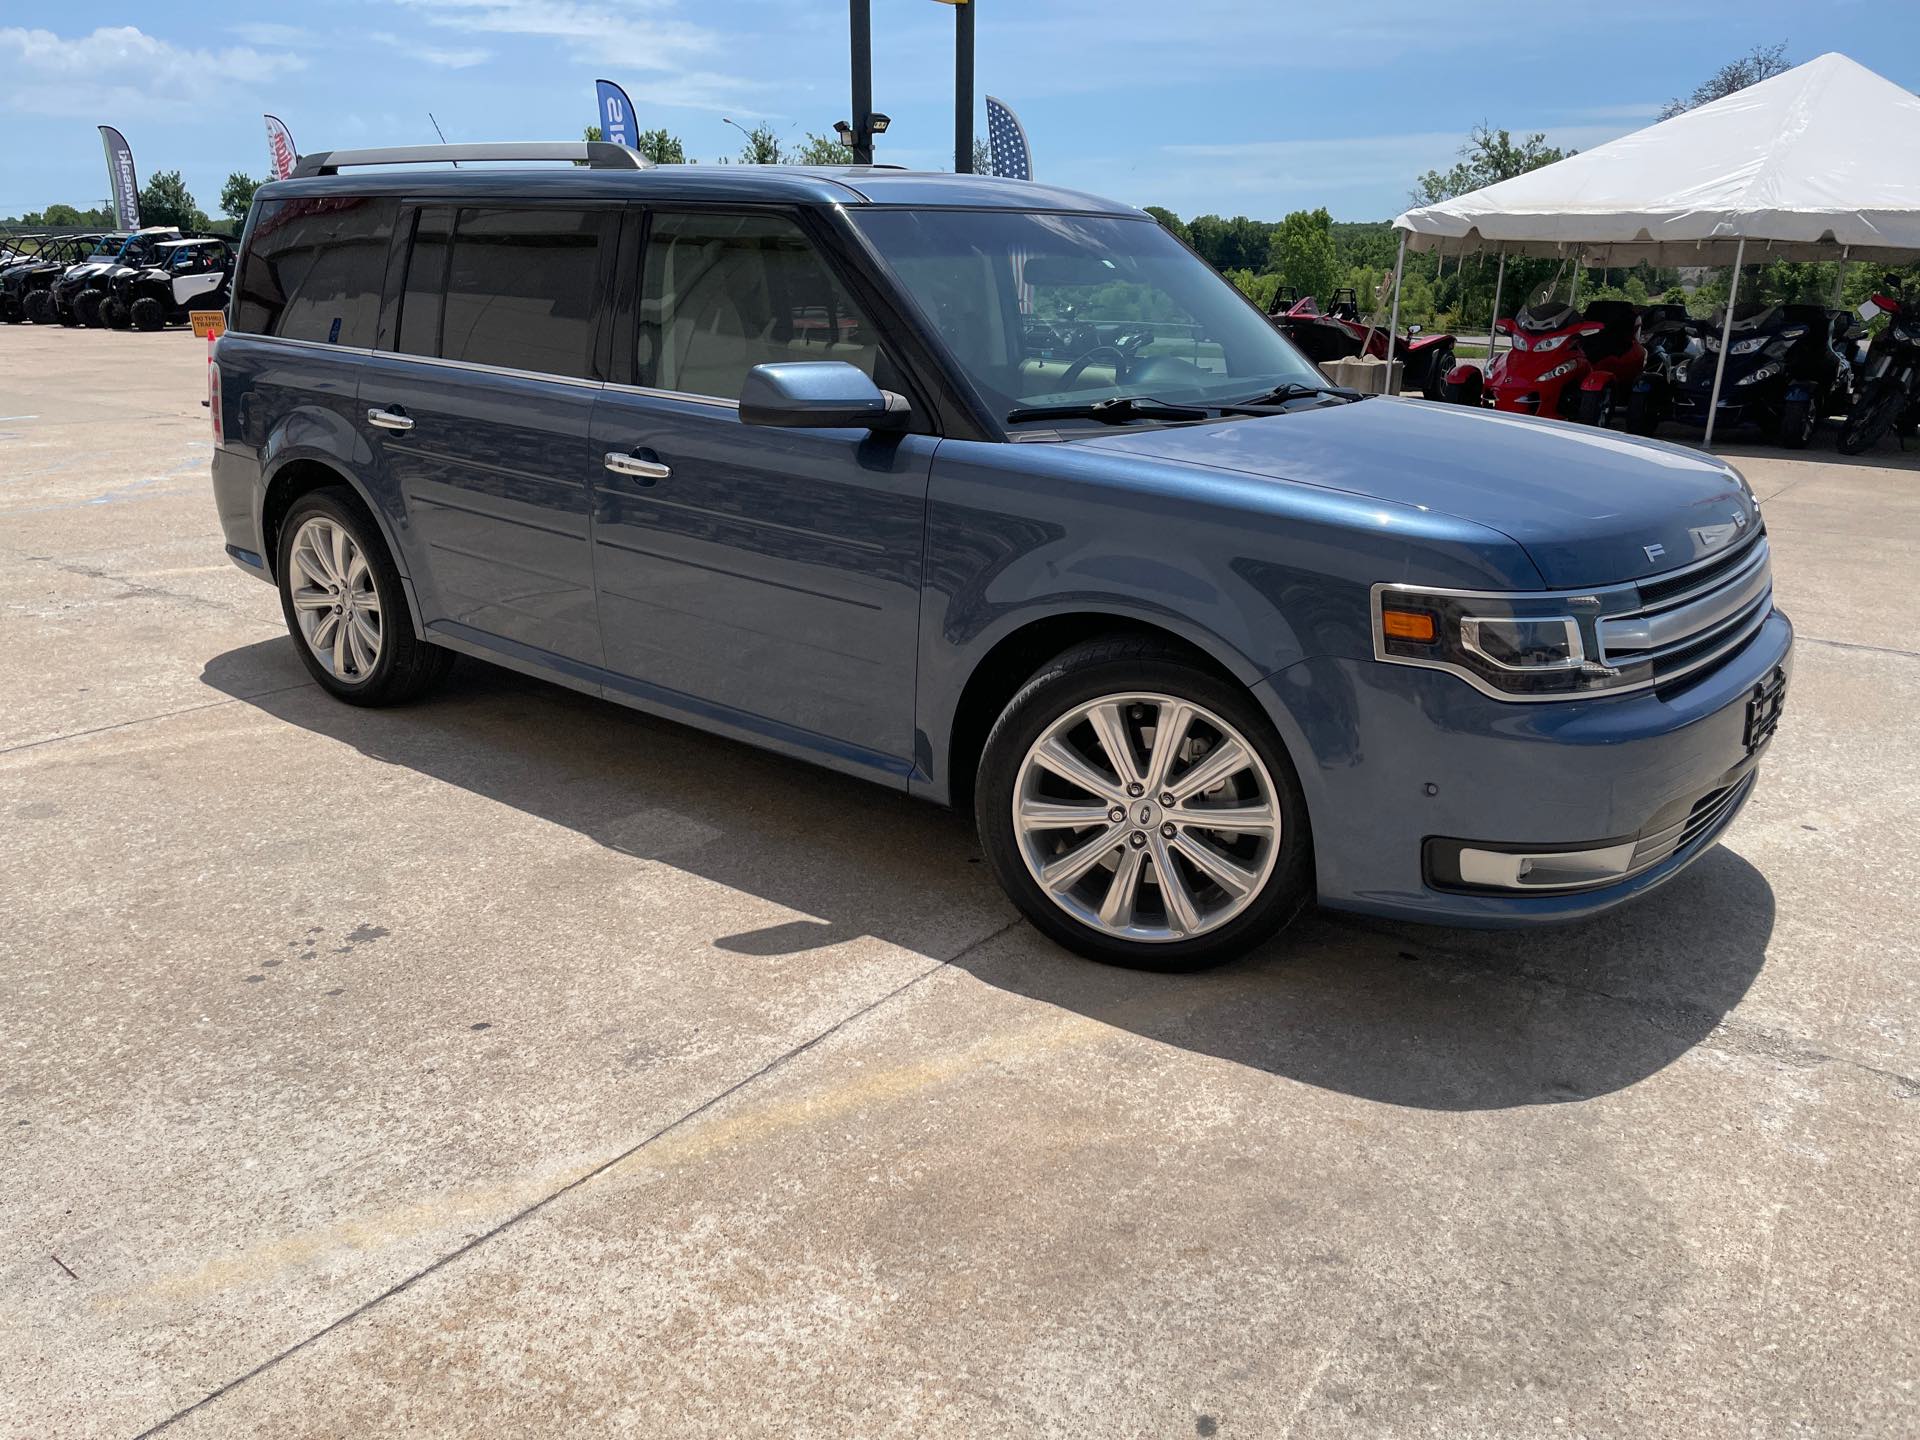 2018 Ford Flex at Head Indian Motorcycle